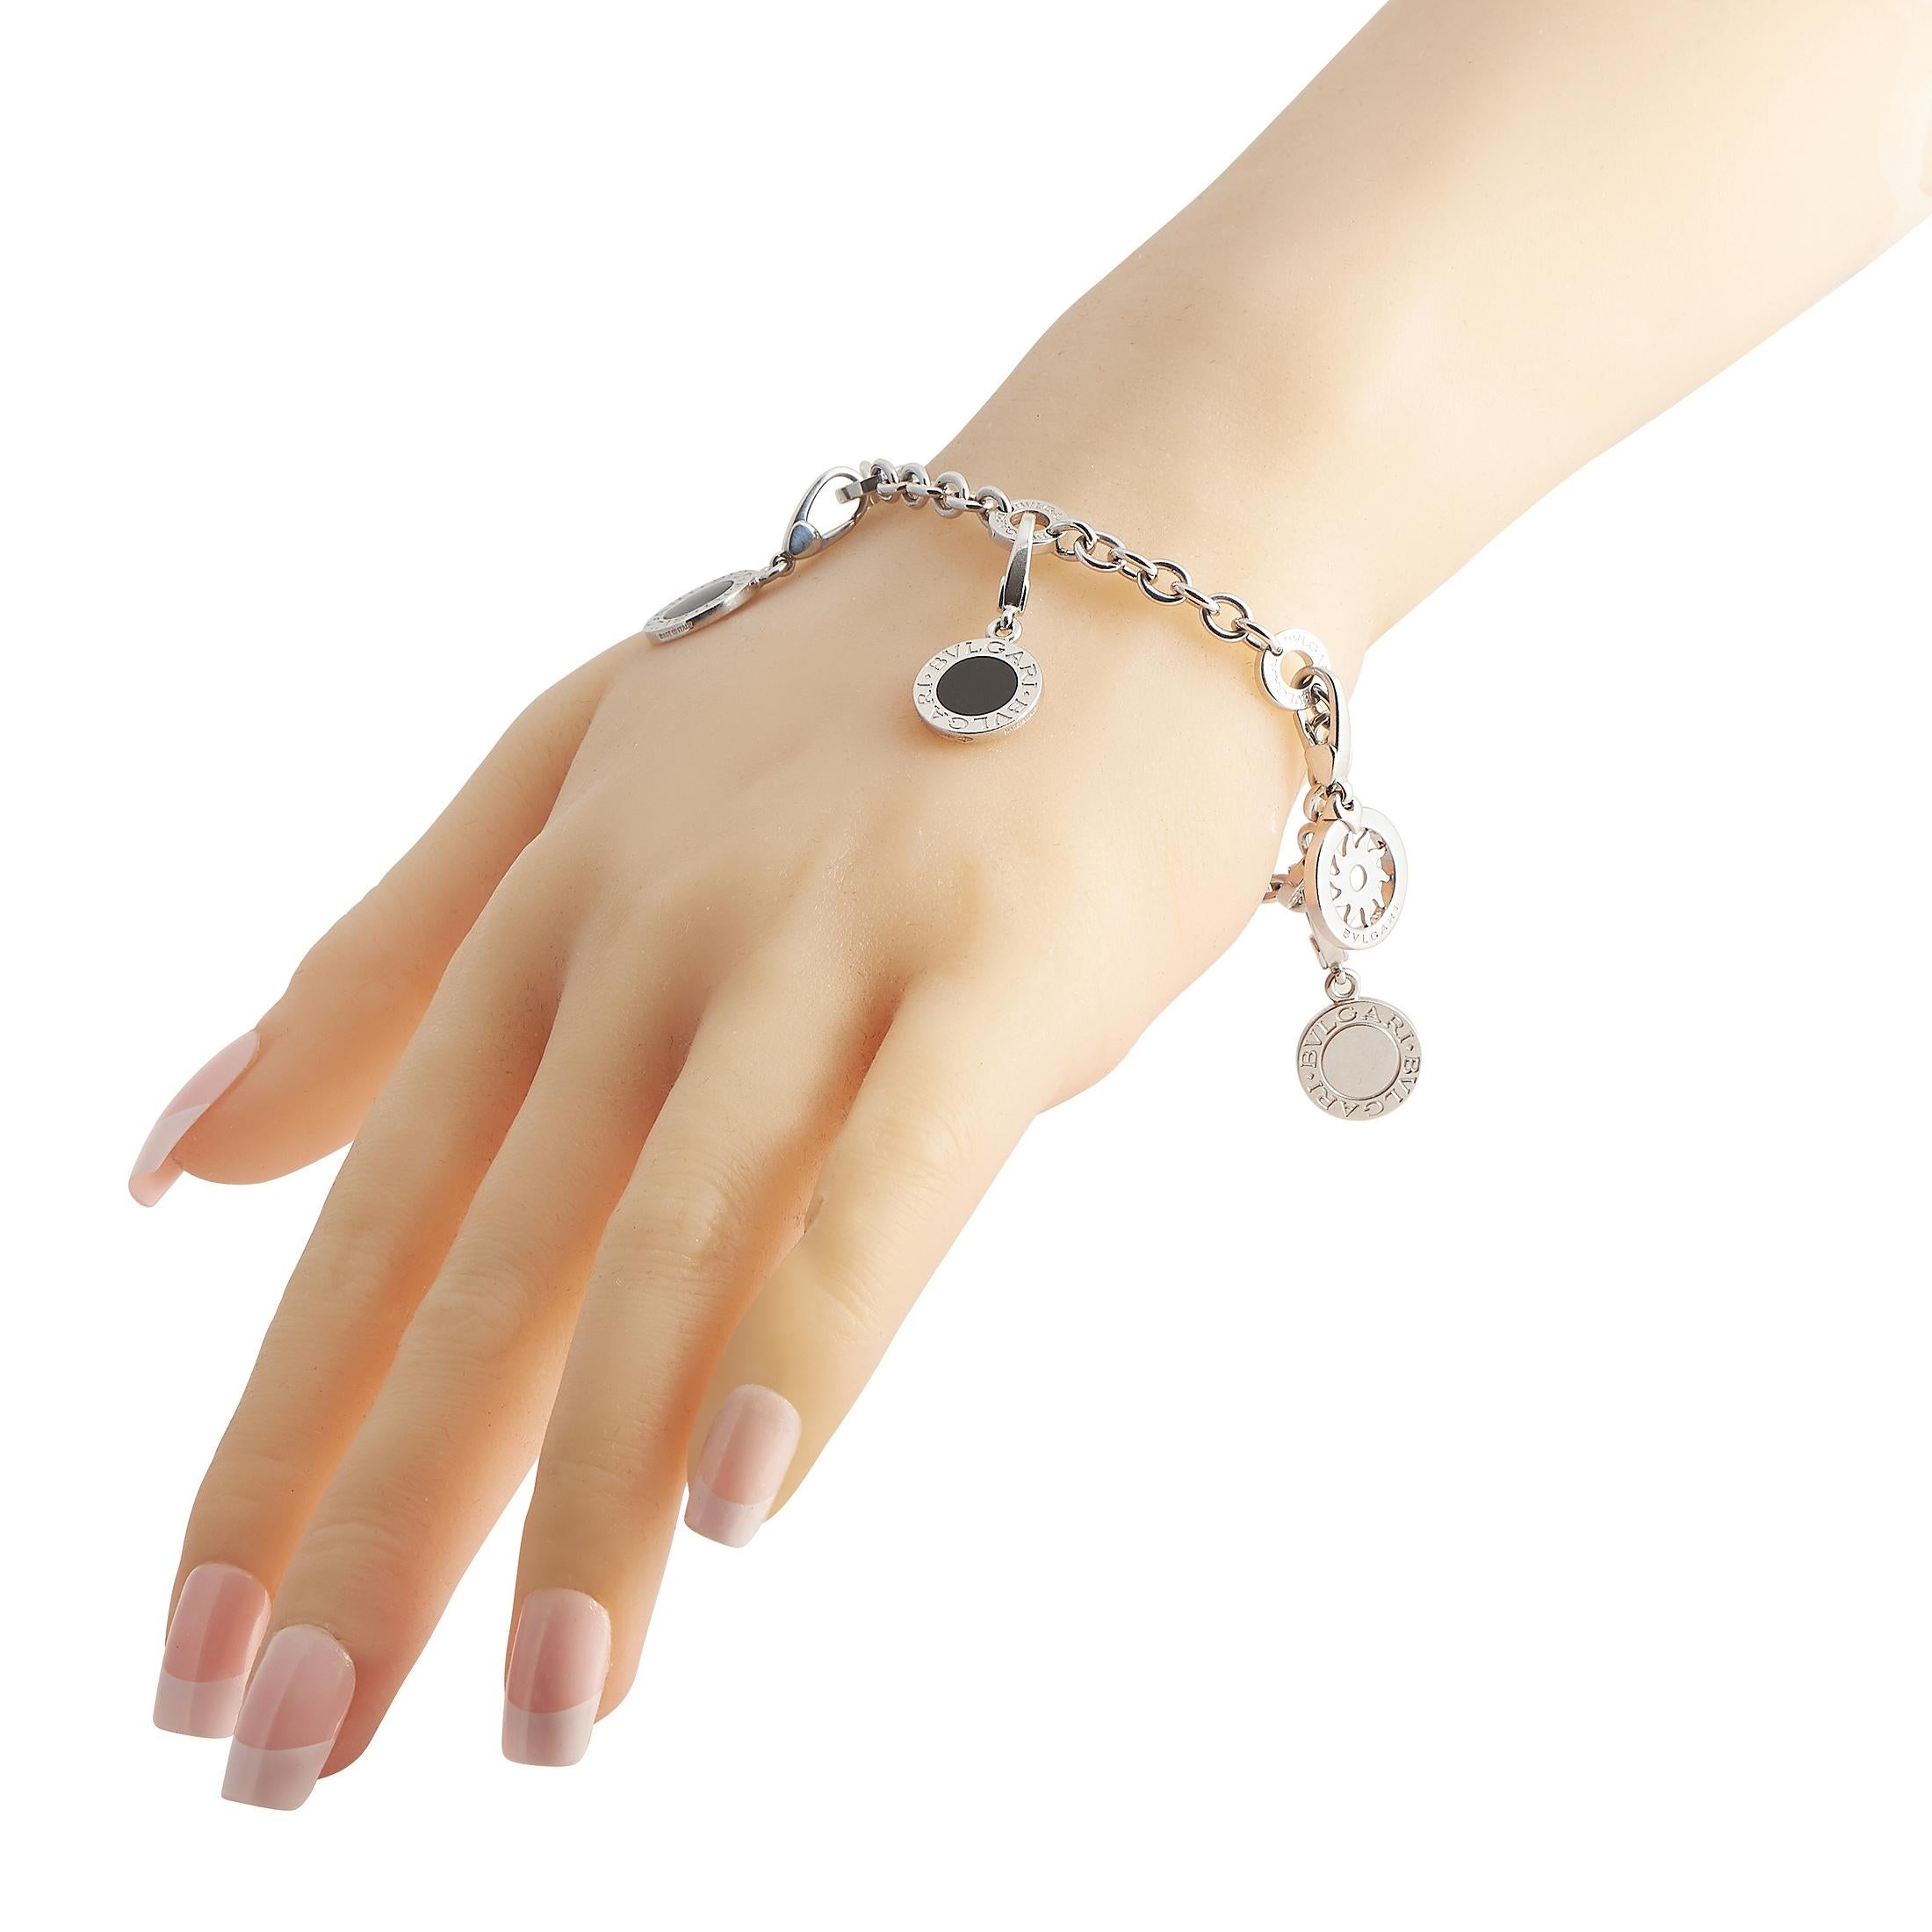 A classic piece of jewelry gets a contemporary upgrade in the form of this elegant Bvlgari charm bracelet. The shimmering 18K White Gold chain measures 7” long and is elevated by the presence of the brand’s signature. It’s adorned with a series of 5